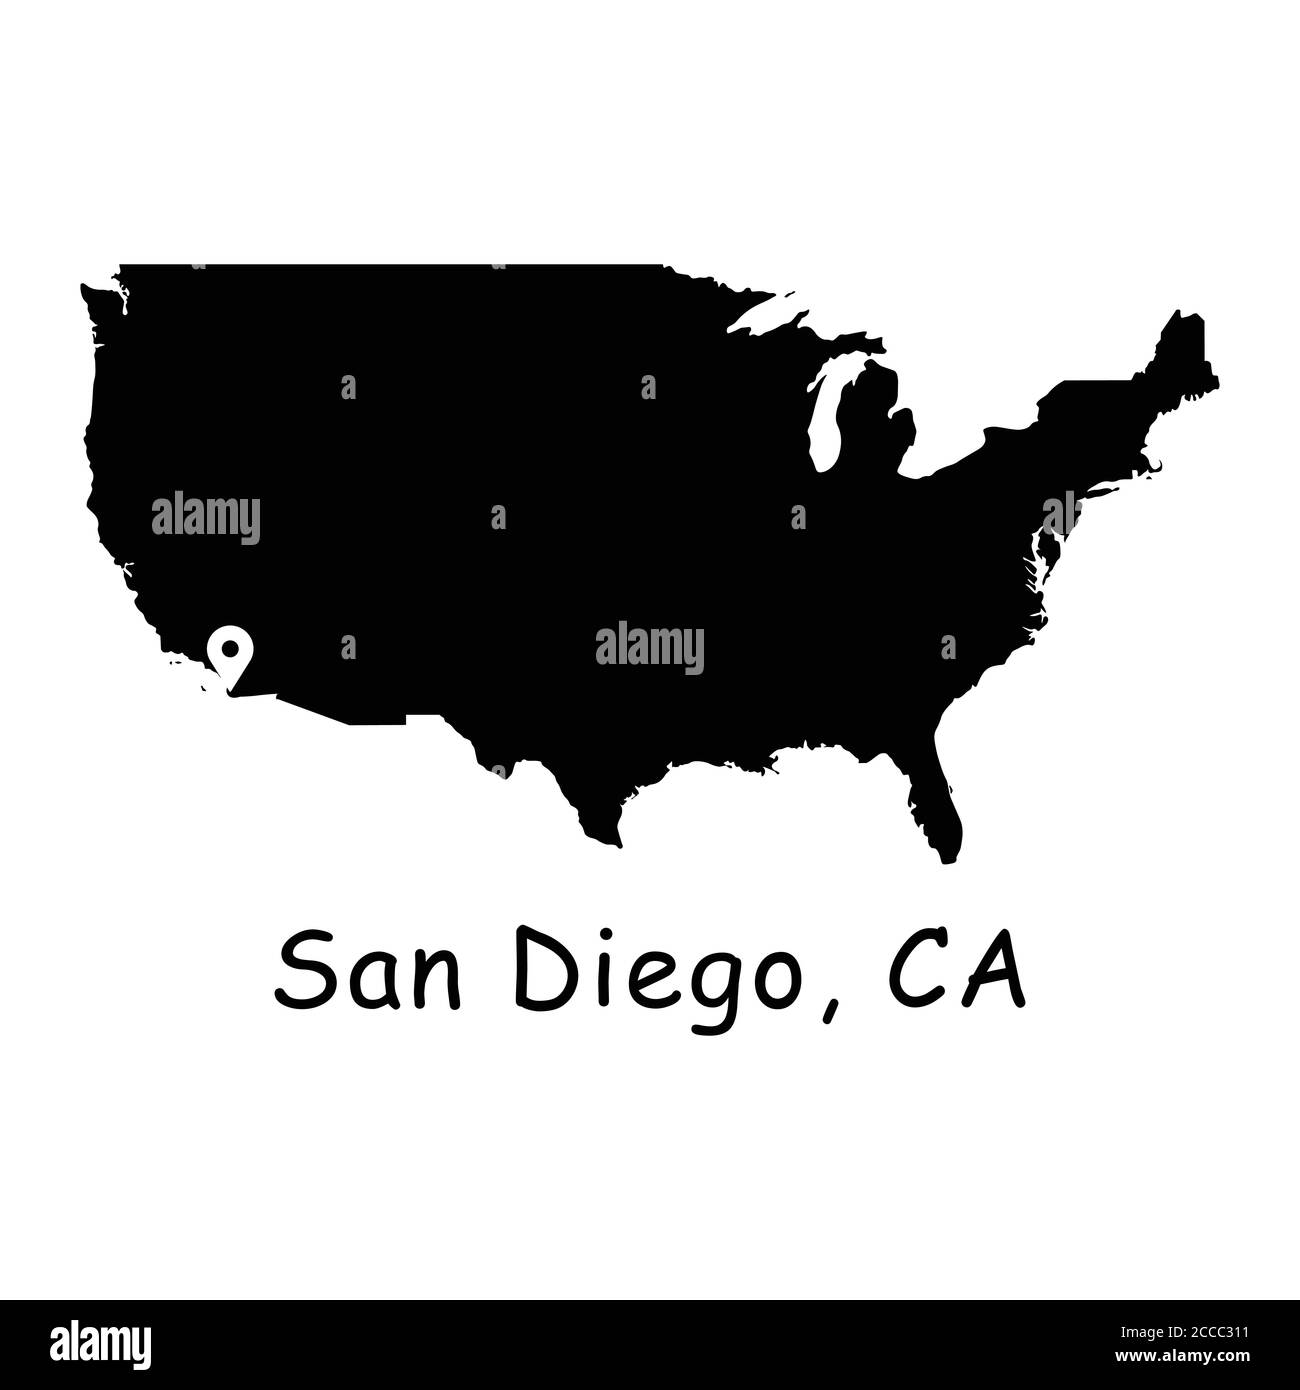 San Diego California City on USA Map. Detailed America Country Map with Location Pin on San Diego CA. Black silhouette vector maps isolated on white b Stock Vector